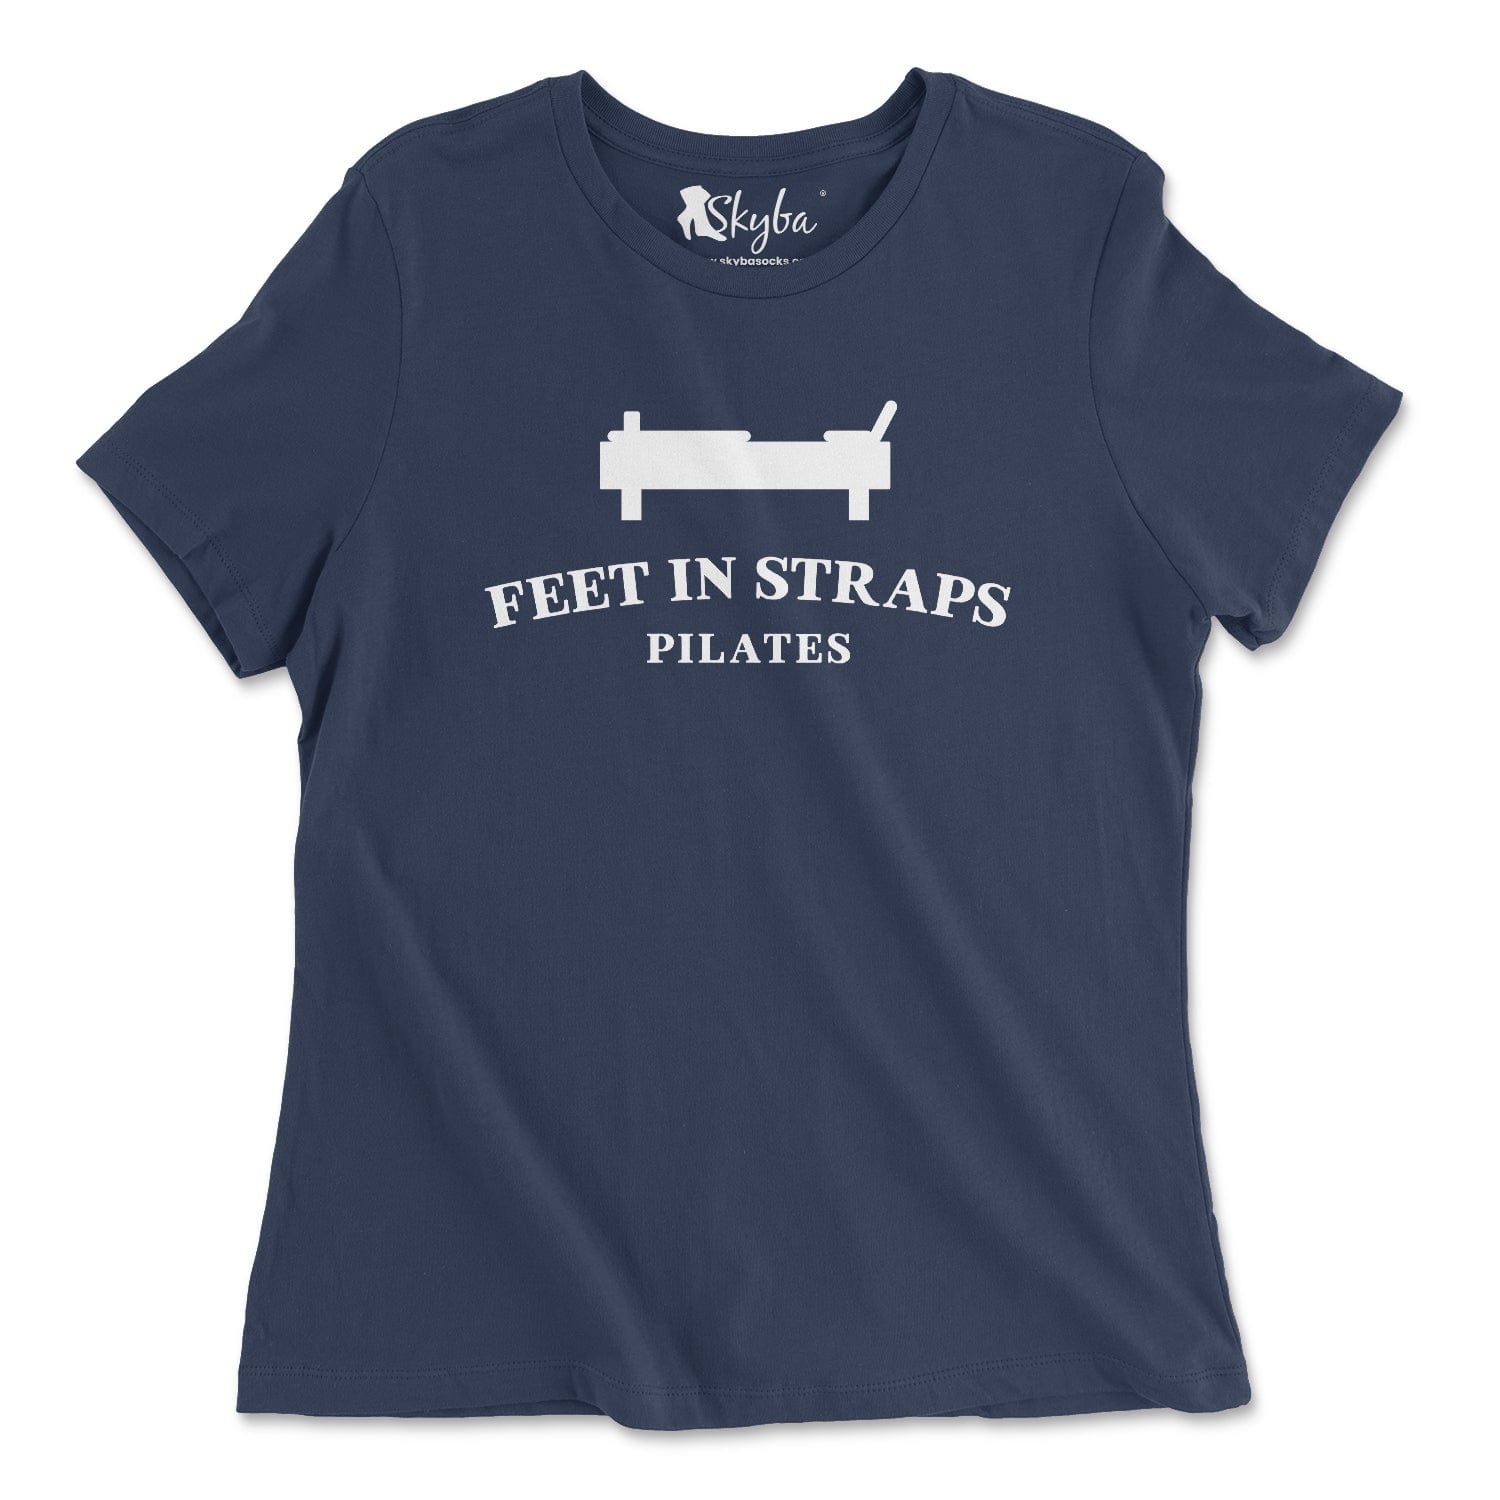 Pilates Feet in Straps - Classic Tee Skyba T-Shirt